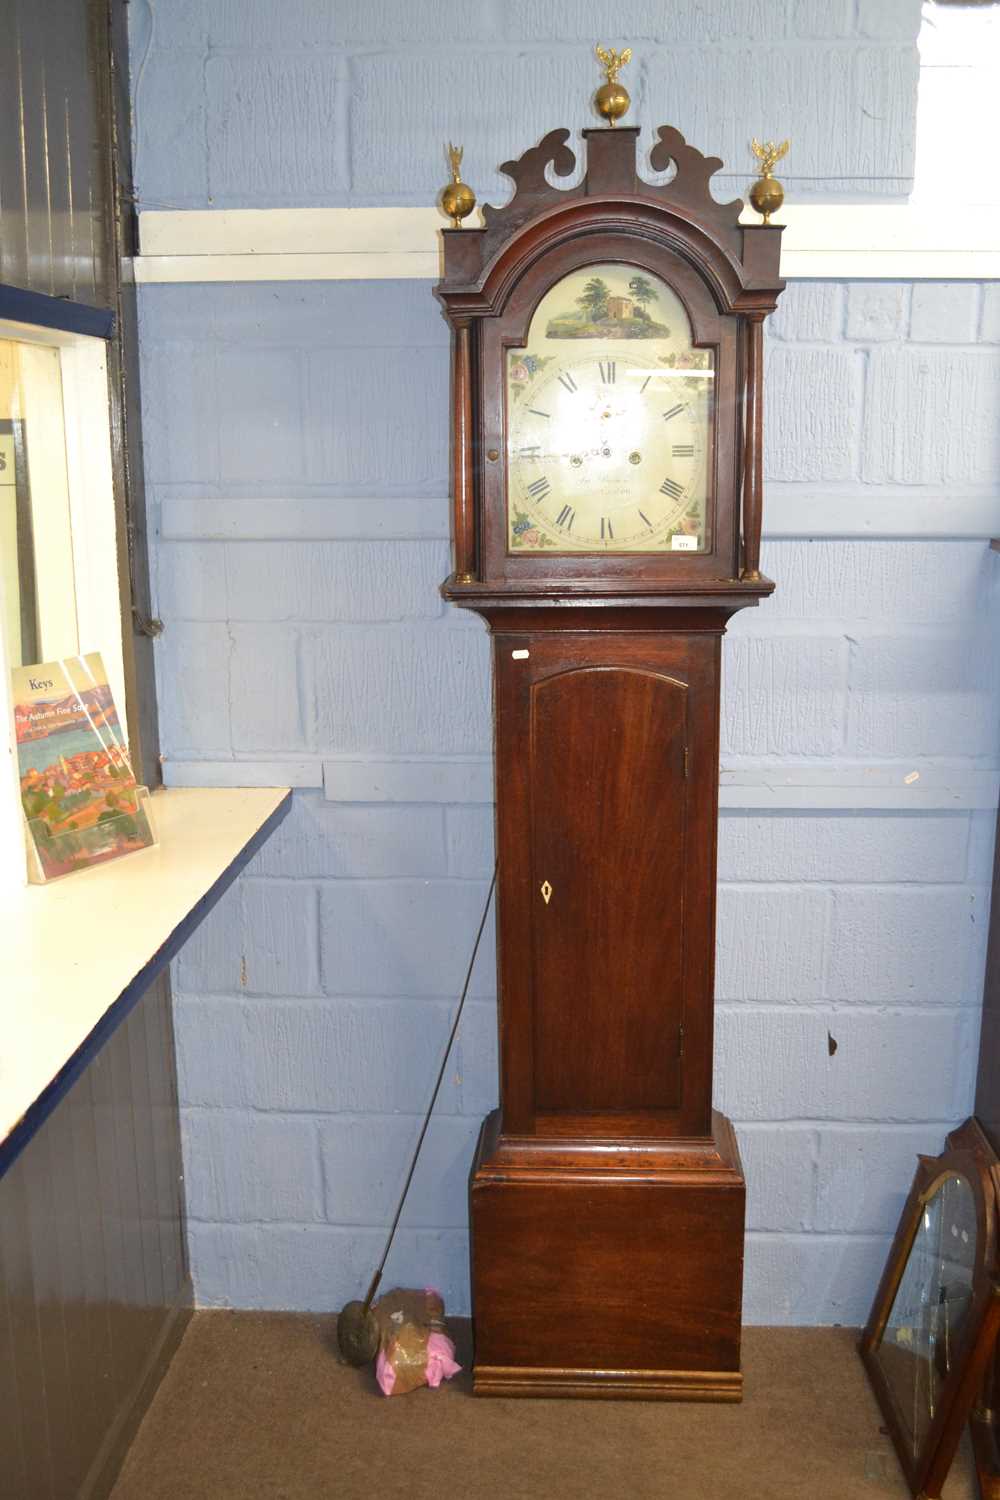 Jonathan Brown, Harleston, 18th Century oak long case clock with painted arched dial and an eight